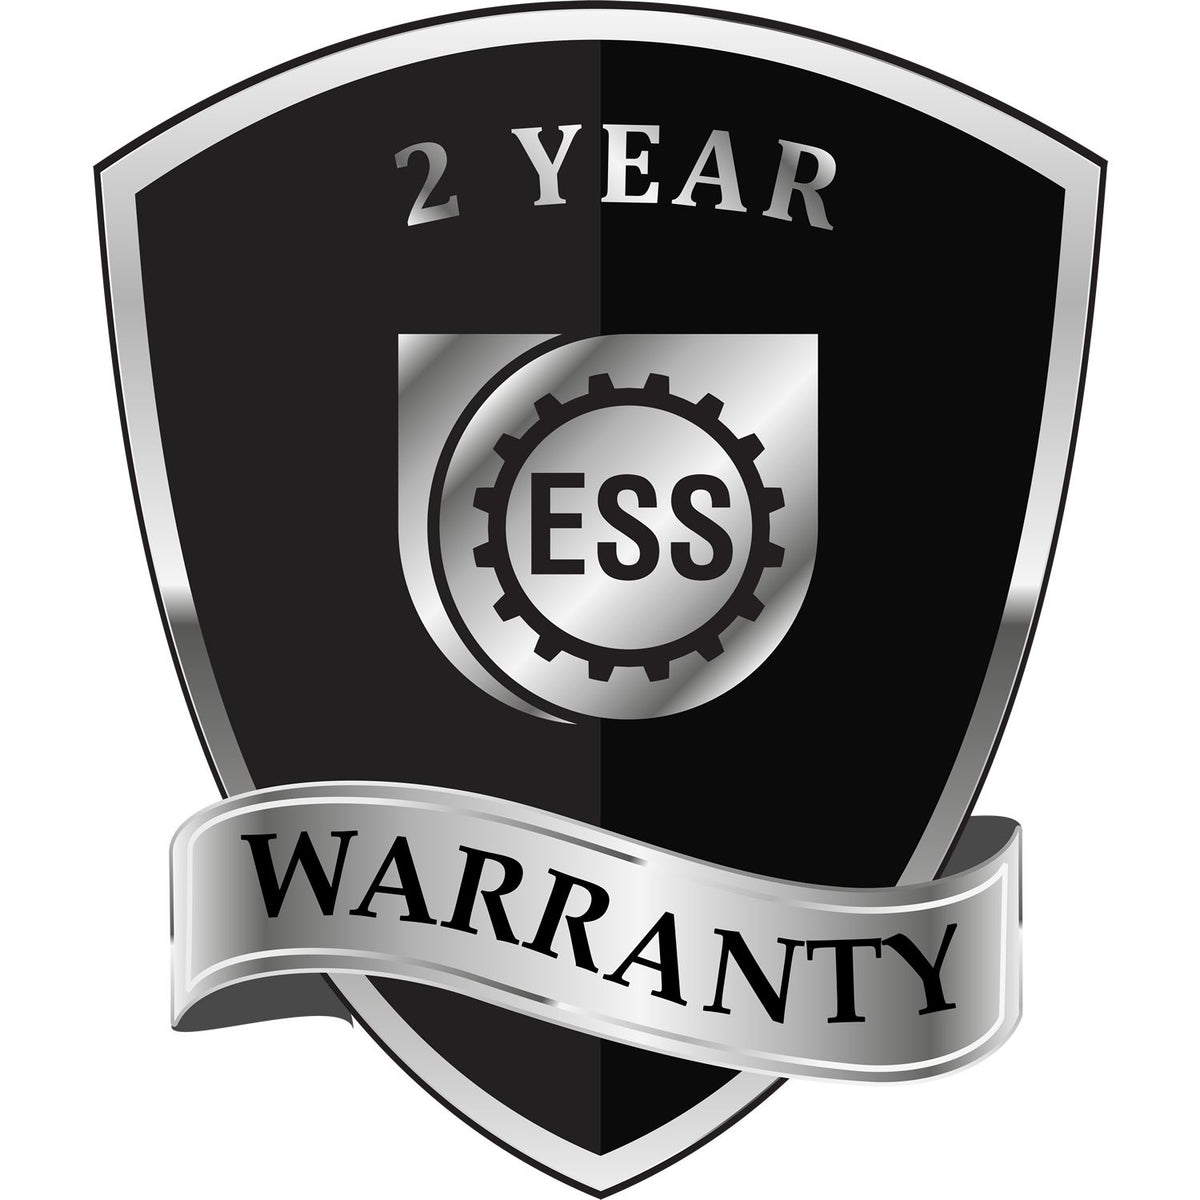 A badge or emblem showing a warranty icon for the Handheld Idaho Land Surveyor Seal